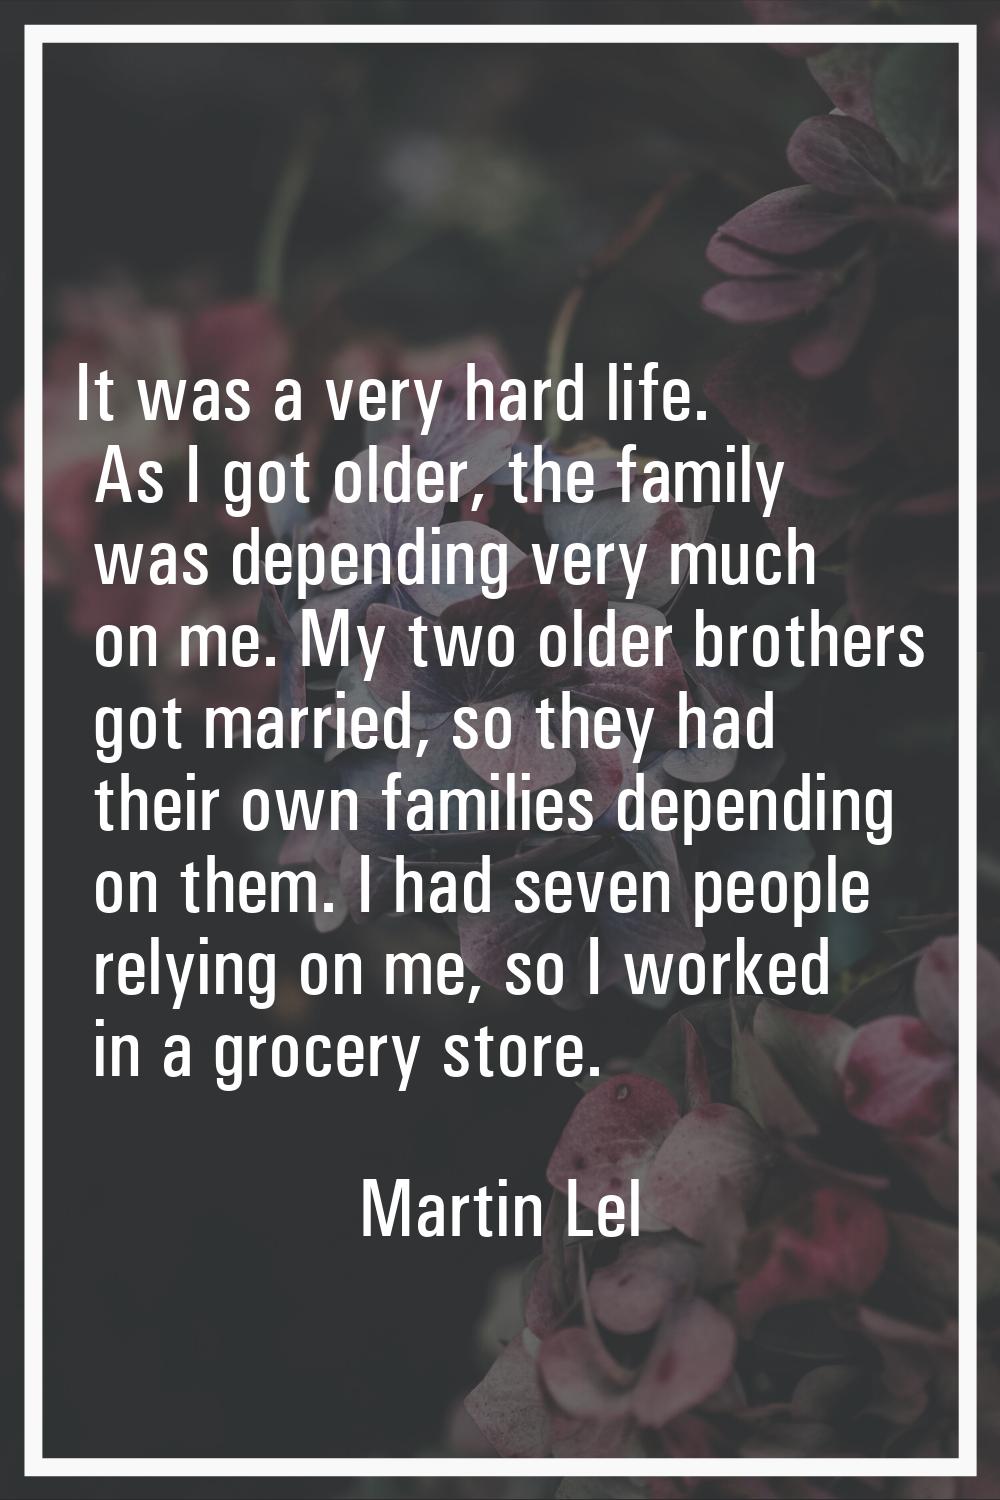 It was a very hard life. As I got older, the family was depending very much on me. My two older bro